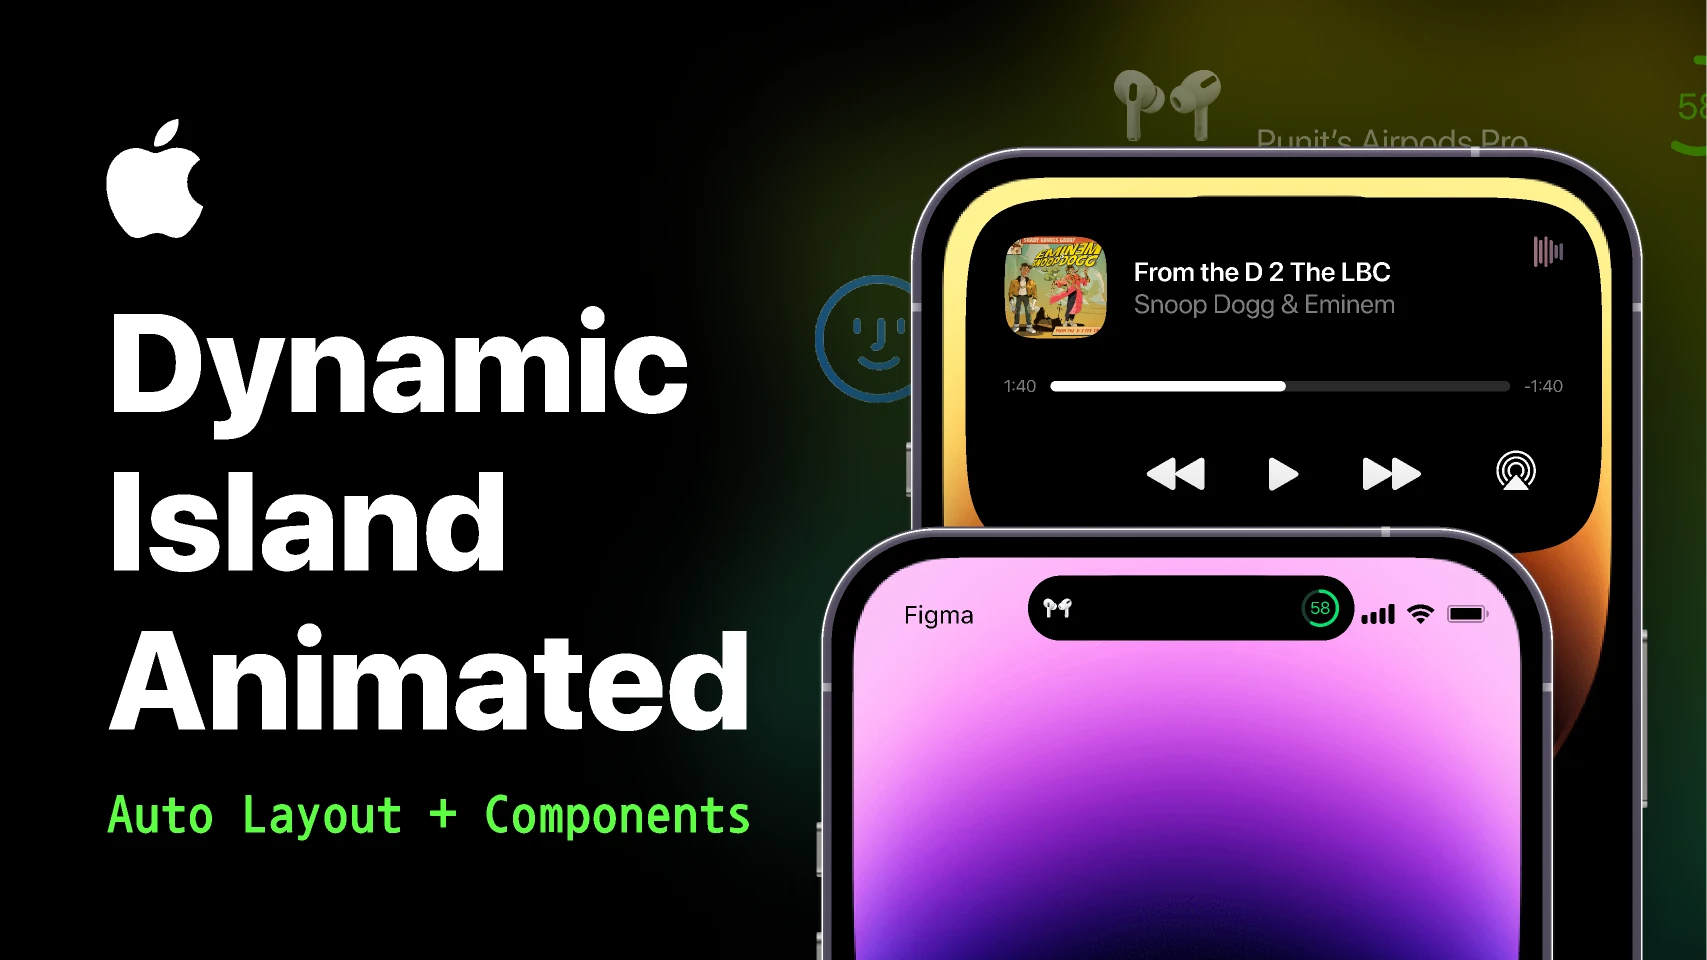 Apple Dynamic Island Animated - Auto Layout + Components for Figma and Adobe XD